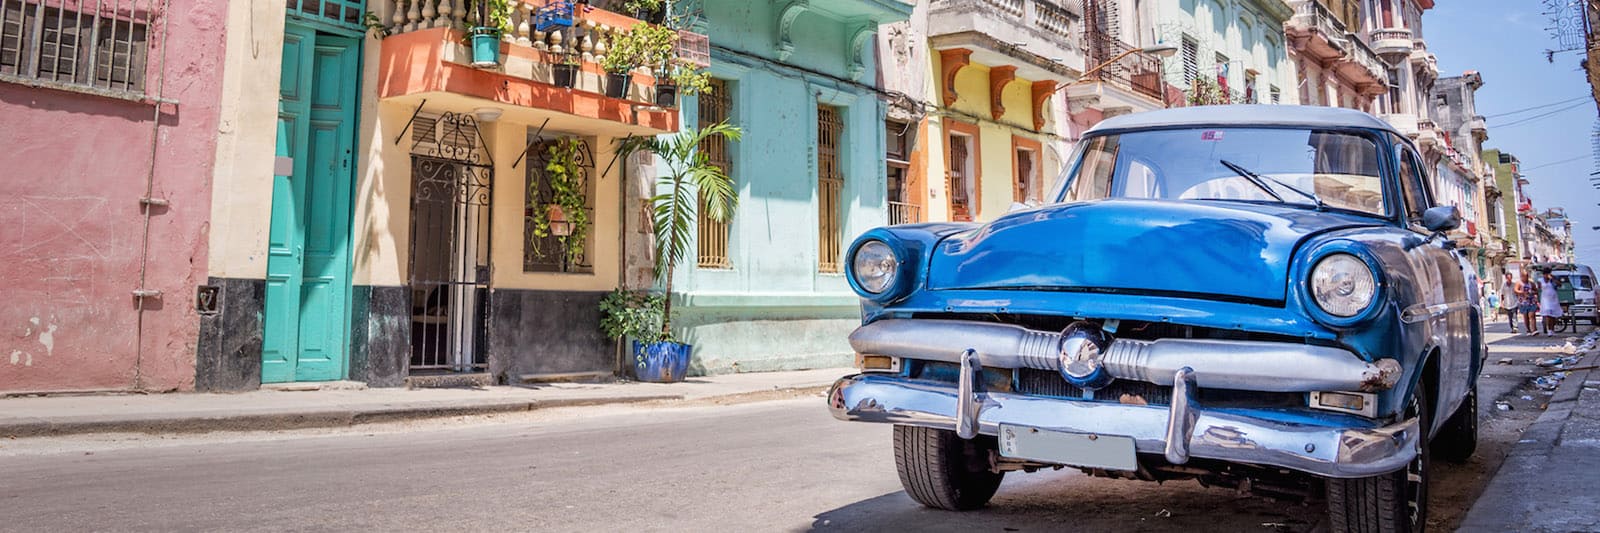 5 Tips for Making the Most Out of A Cuba Photography Holiday